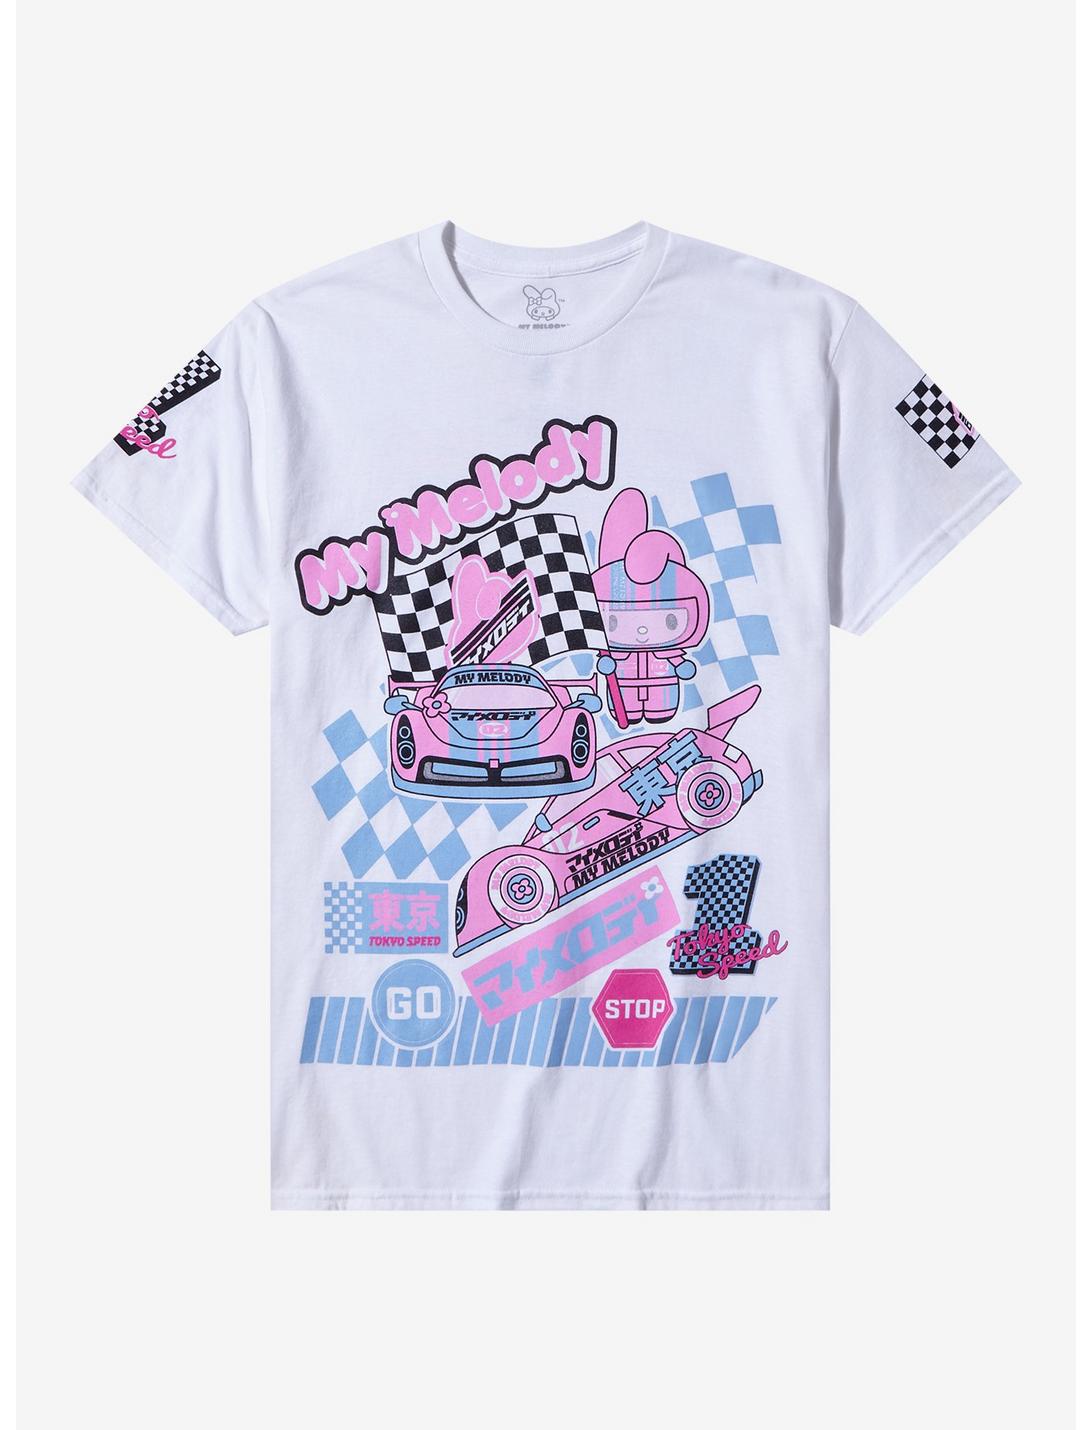 My Melody Racing Collage Boyfriend Fit Girls T-Shirt, MULTI, hi-res